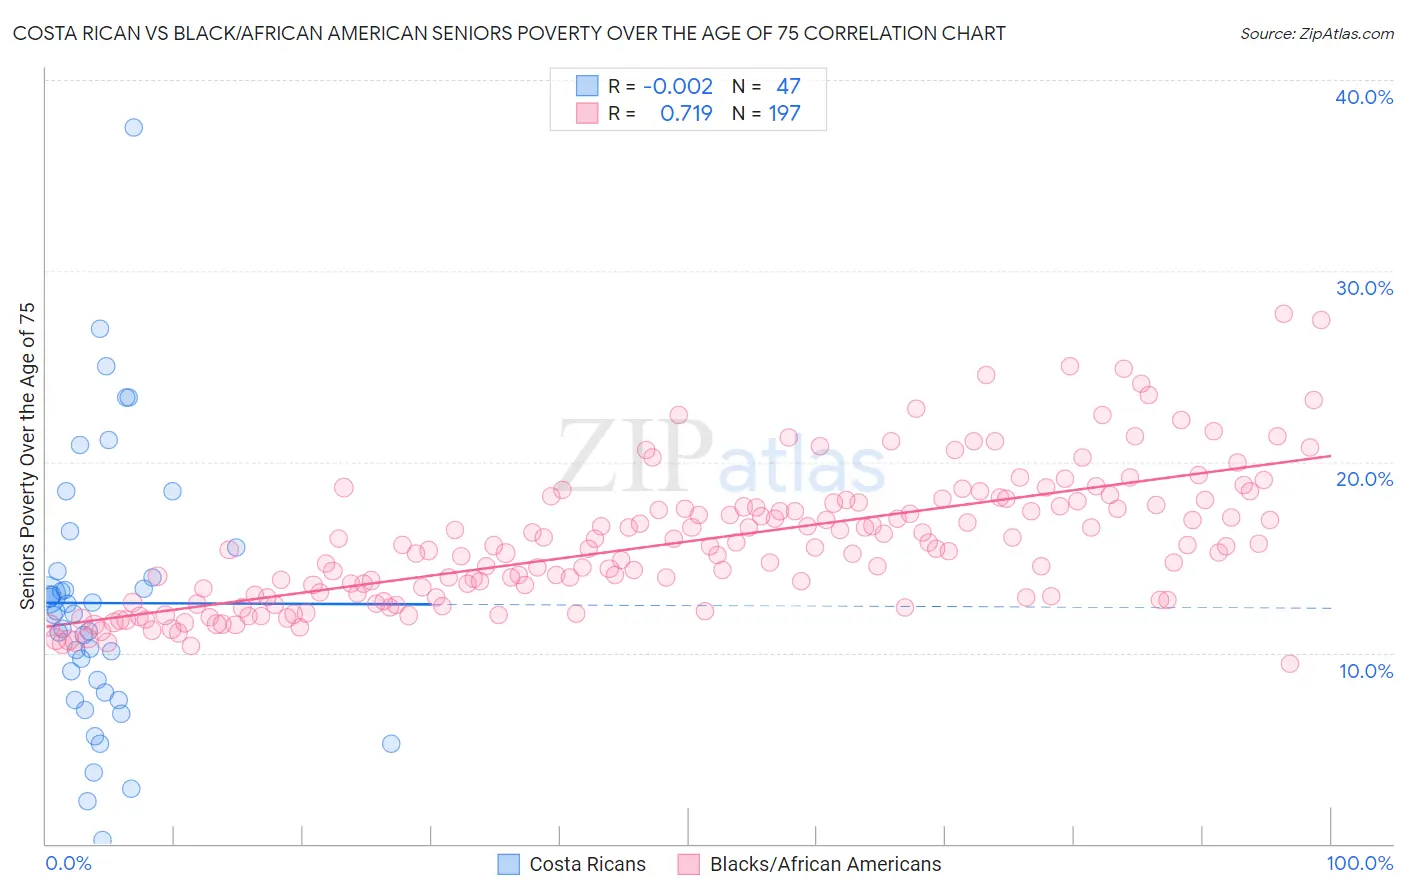 Costa Rican vs Black/African American Seniors Poverty Over the Age of 75